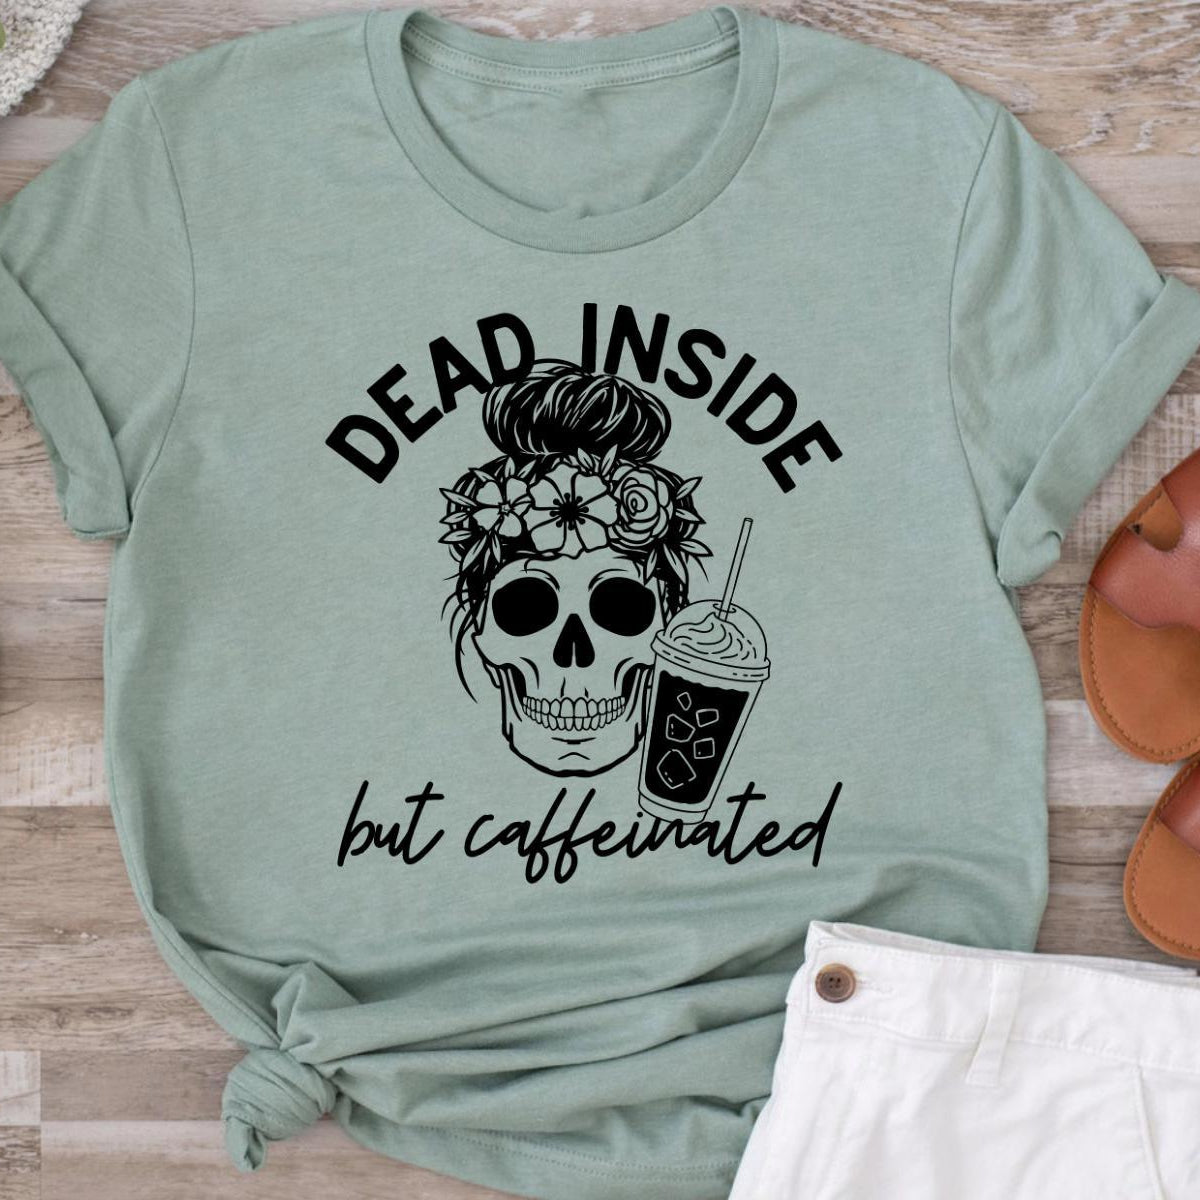 Dead Inside but caffeinated - Signastyle Boutique